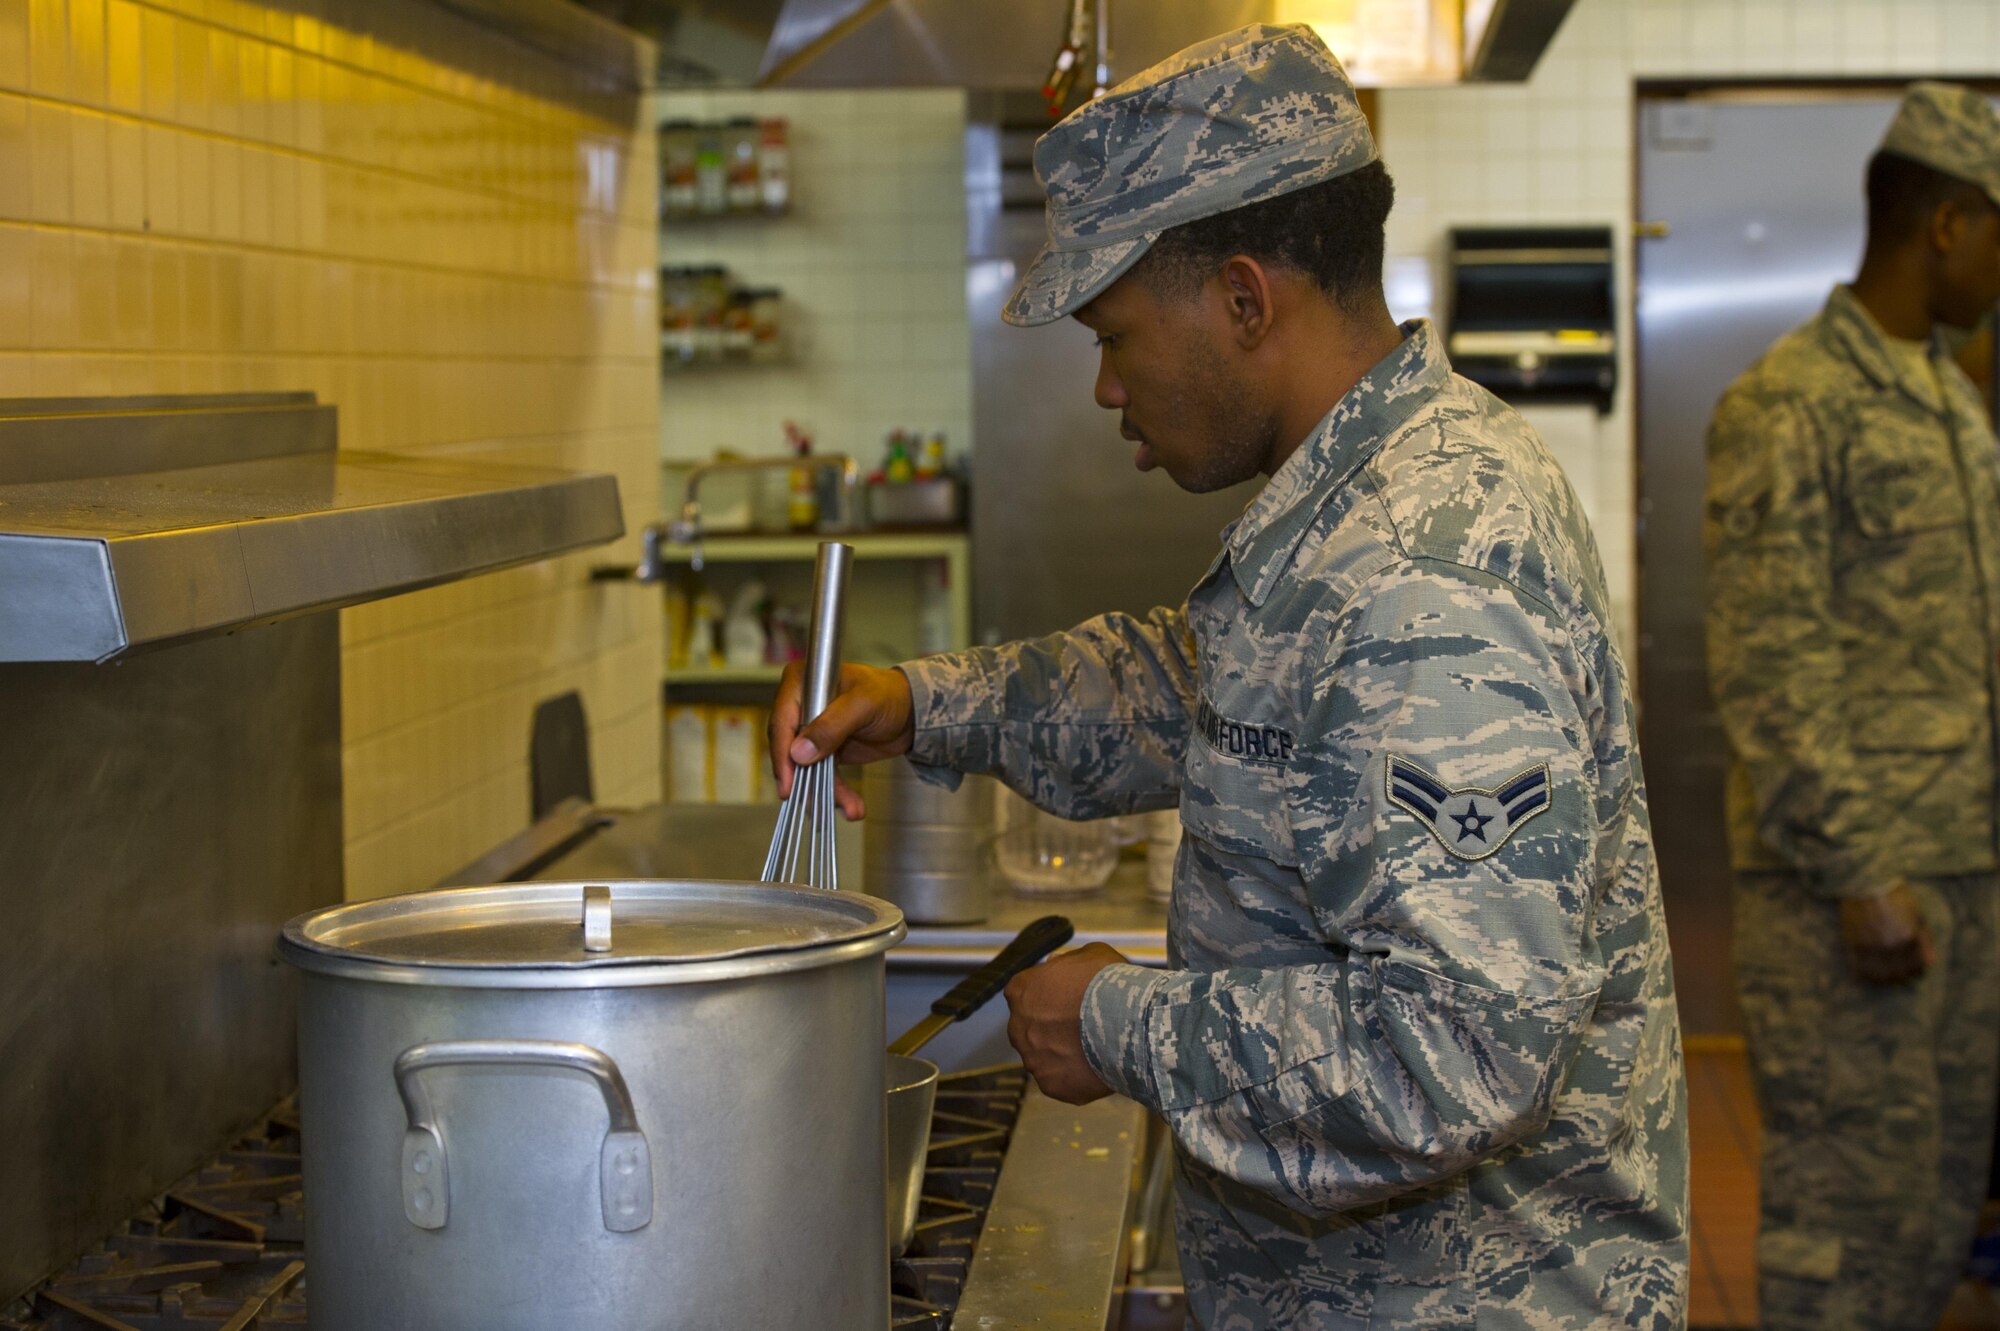 Airman 1st Class Tyron Culverson, 926th Force Support Squadron services apprentice, prepares pasta for a shrimp linguine May 13, 2016, at the Crosswinds Dining Facility. 926th FSS service members have participated in 90-day training blocks in conjunction with the 99th FSS to support active duty manning levels while receiving on the job training.